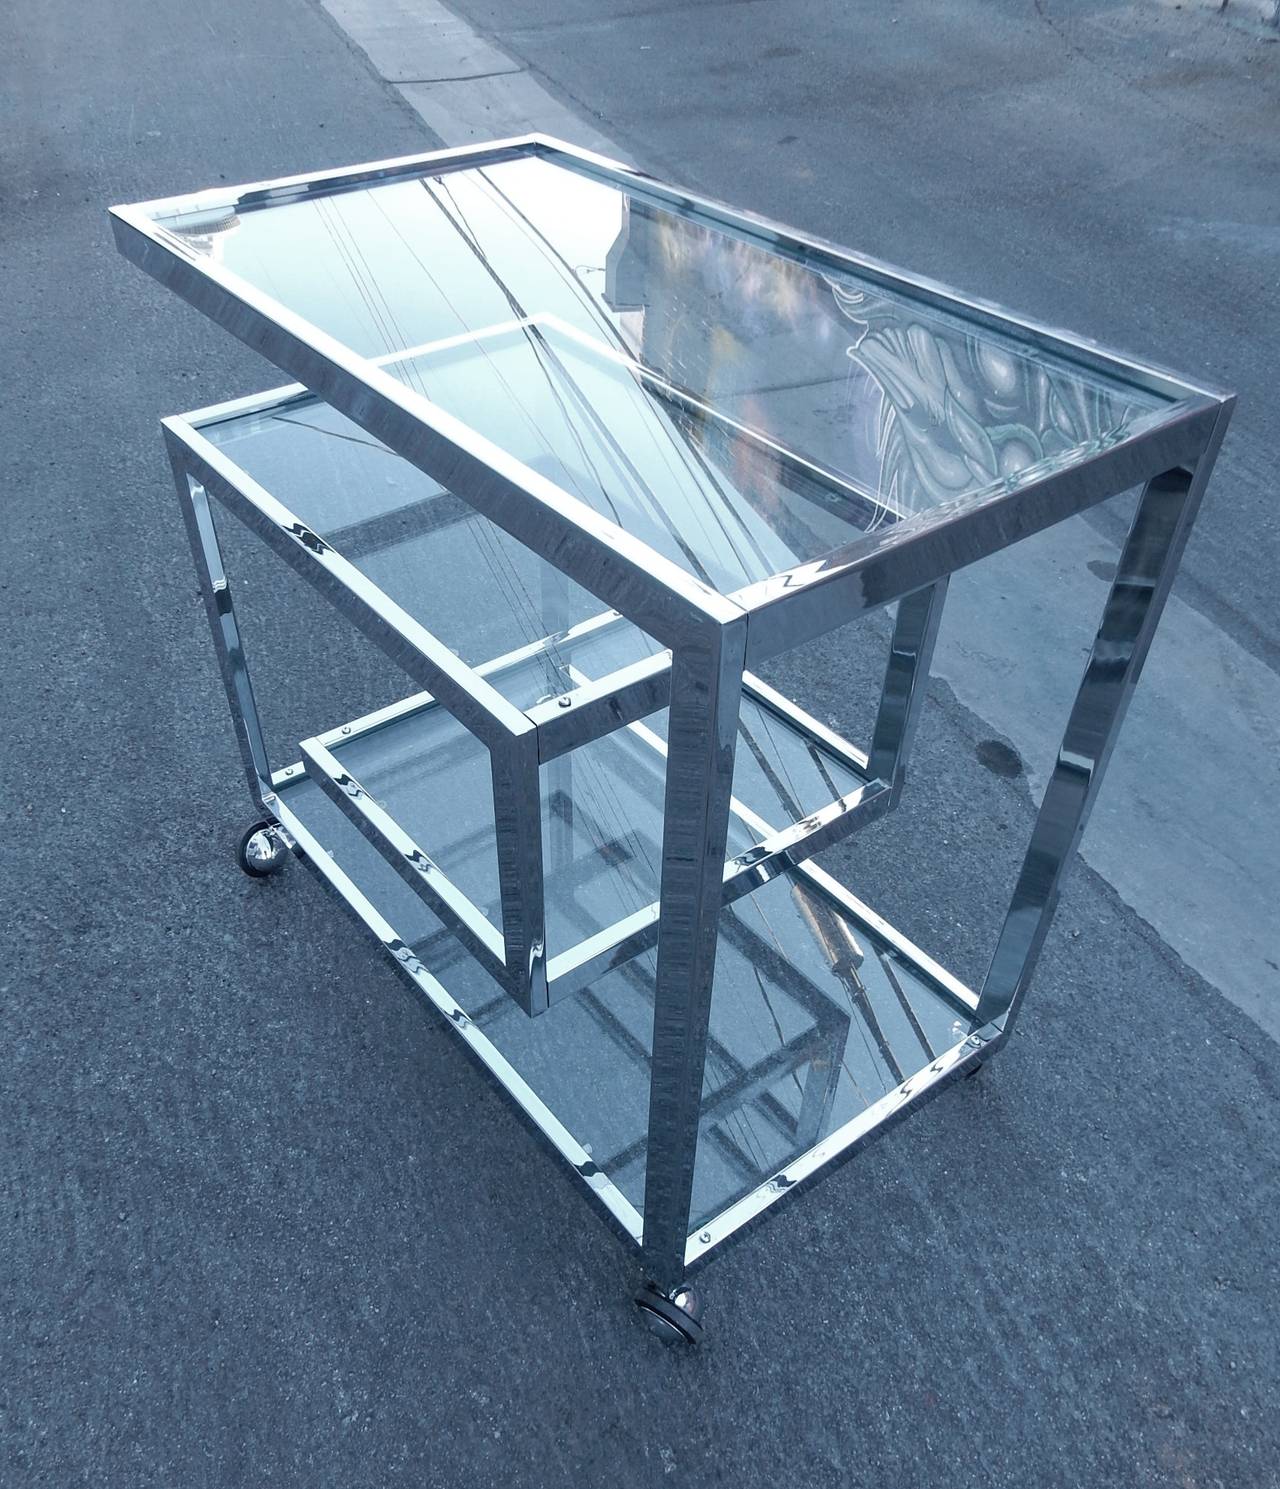 Spectacular example of a Milo Baughman design with flat bar chrome, Greek key design.
This bar cart has 4 glass shelves and smooth rolling casters. 
Excellent condition!